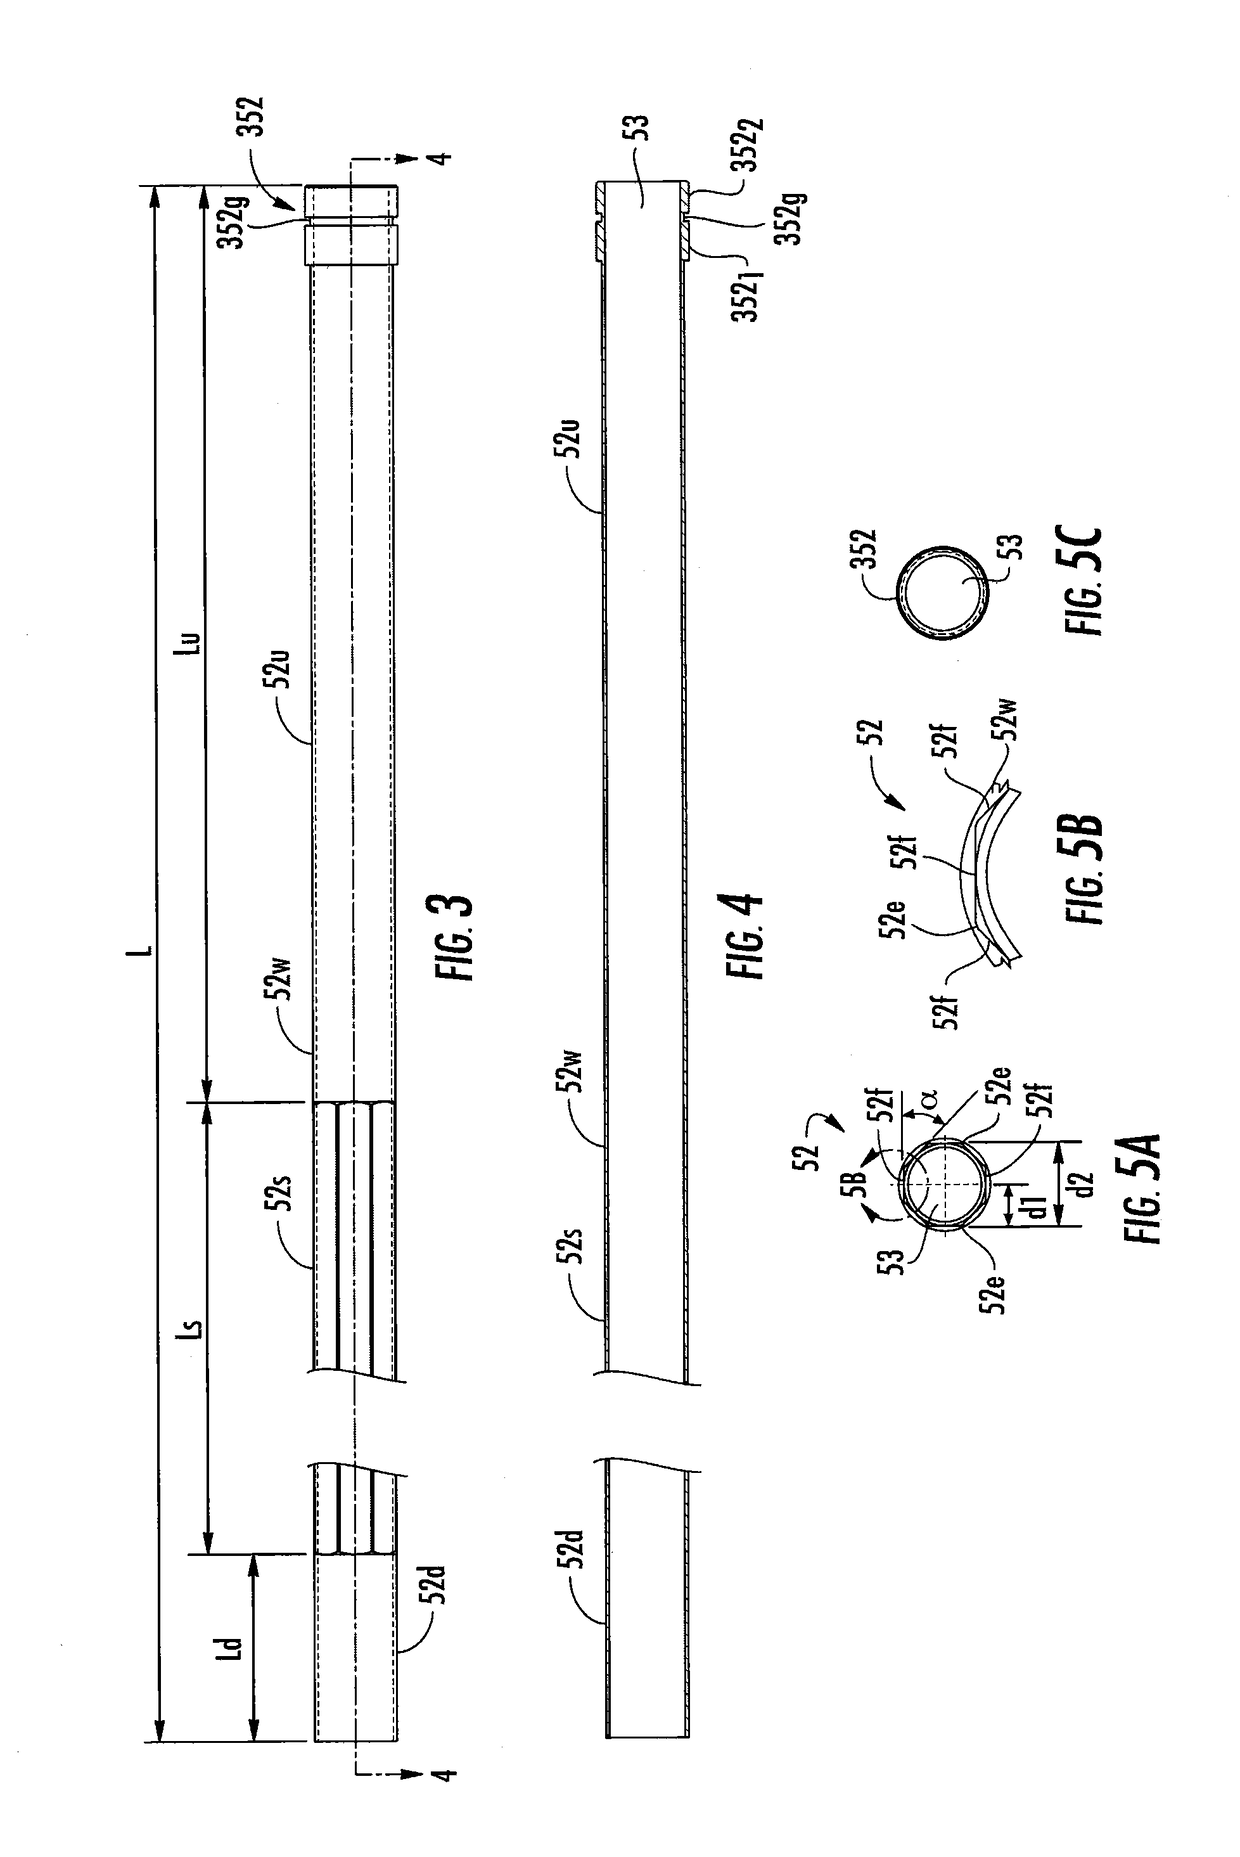 Packaging systems with sizing mandrels and related devices that can operate at reduced pressures suitable for low temperature explosives emulsions